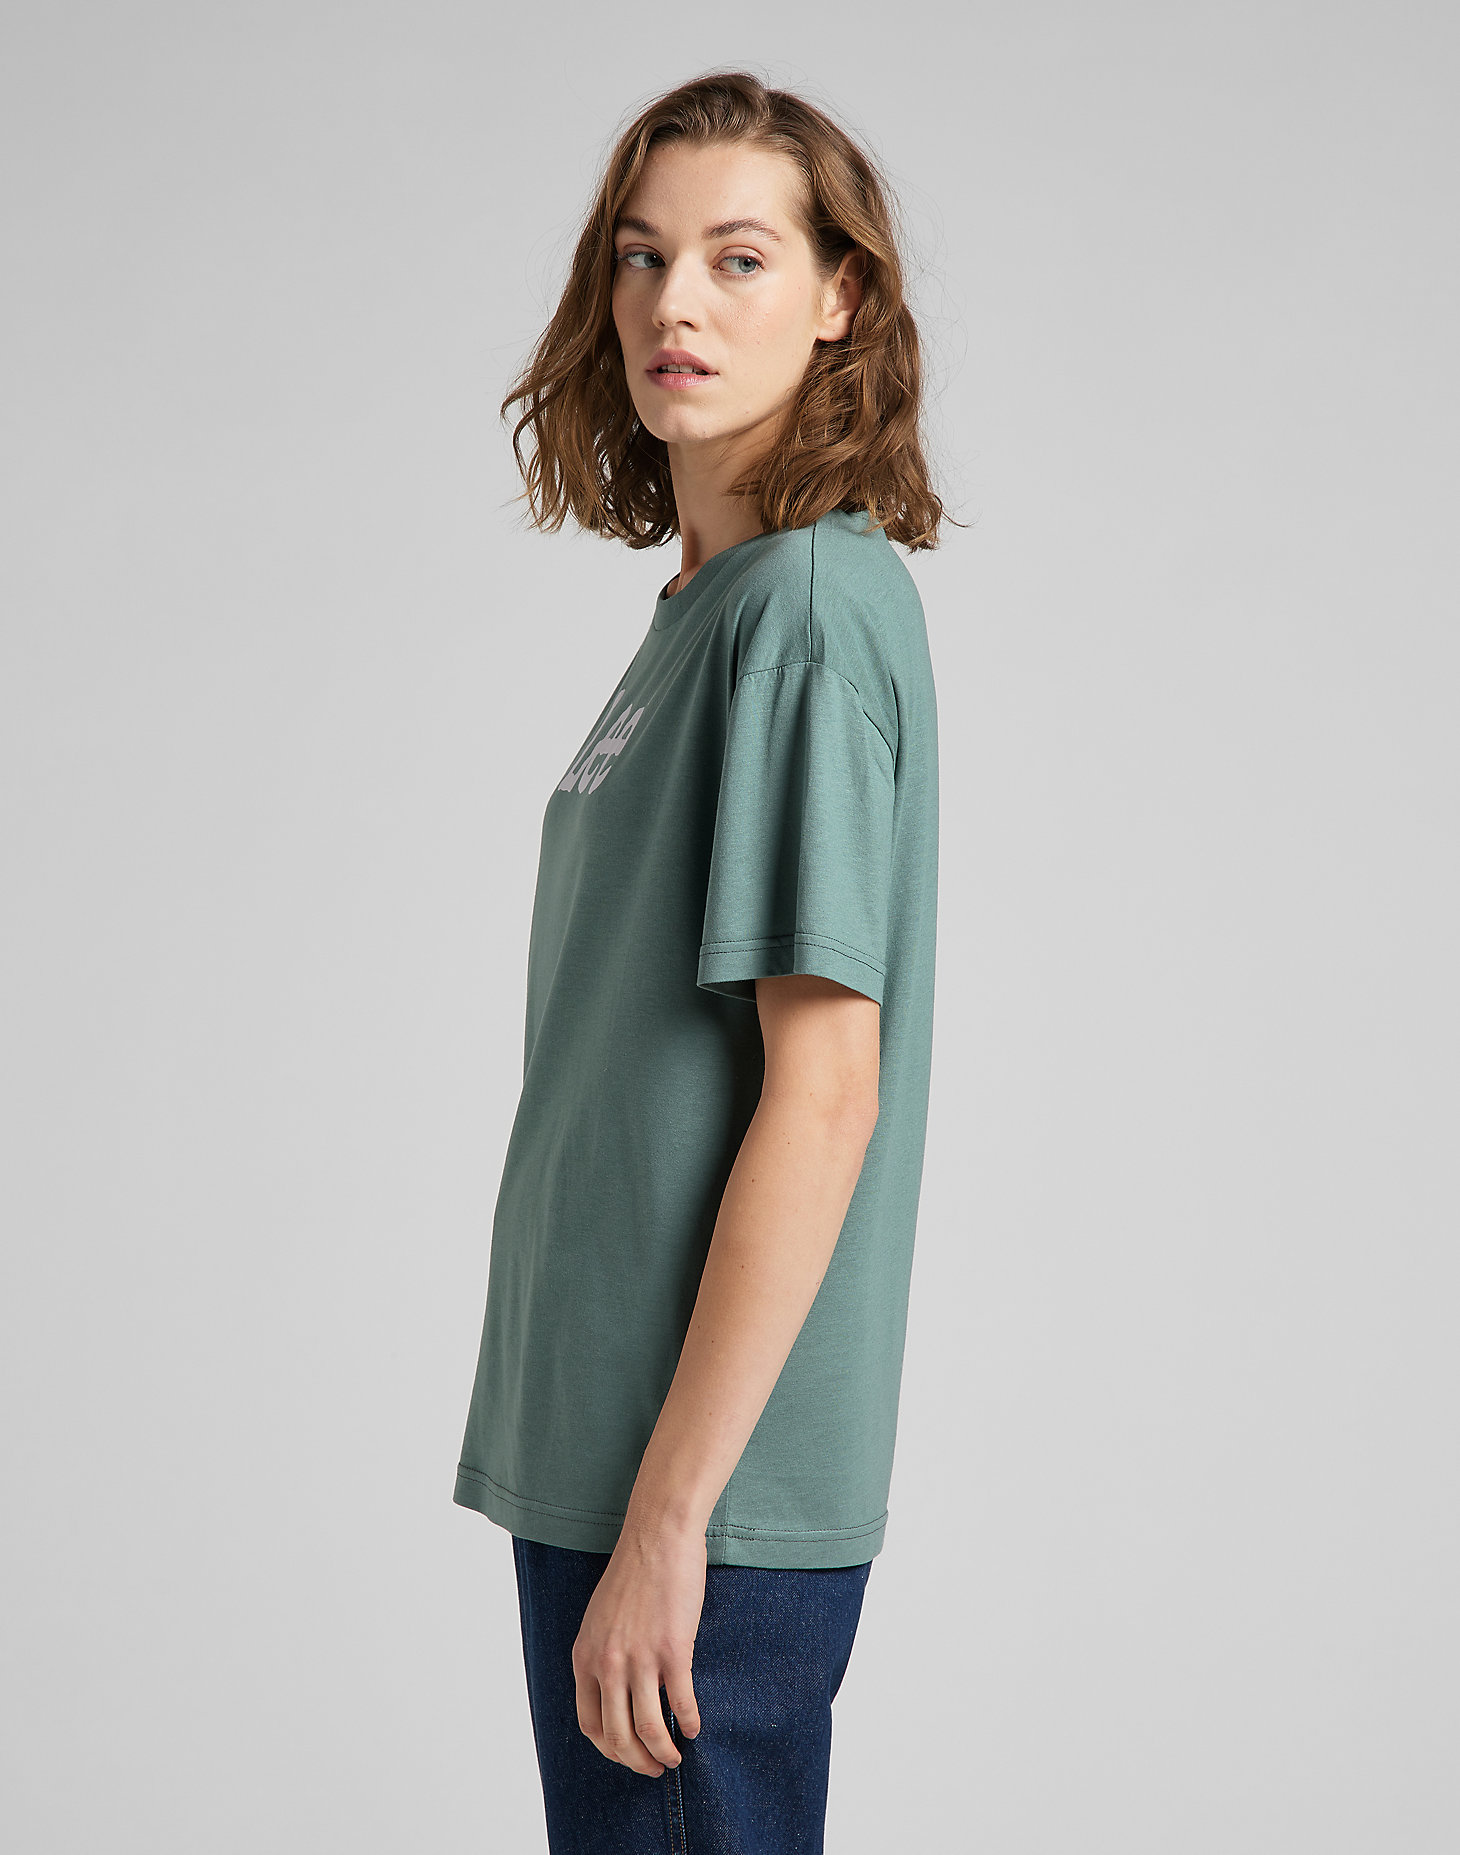 Relaxed Crew Tee in Steel Green alternative view 3